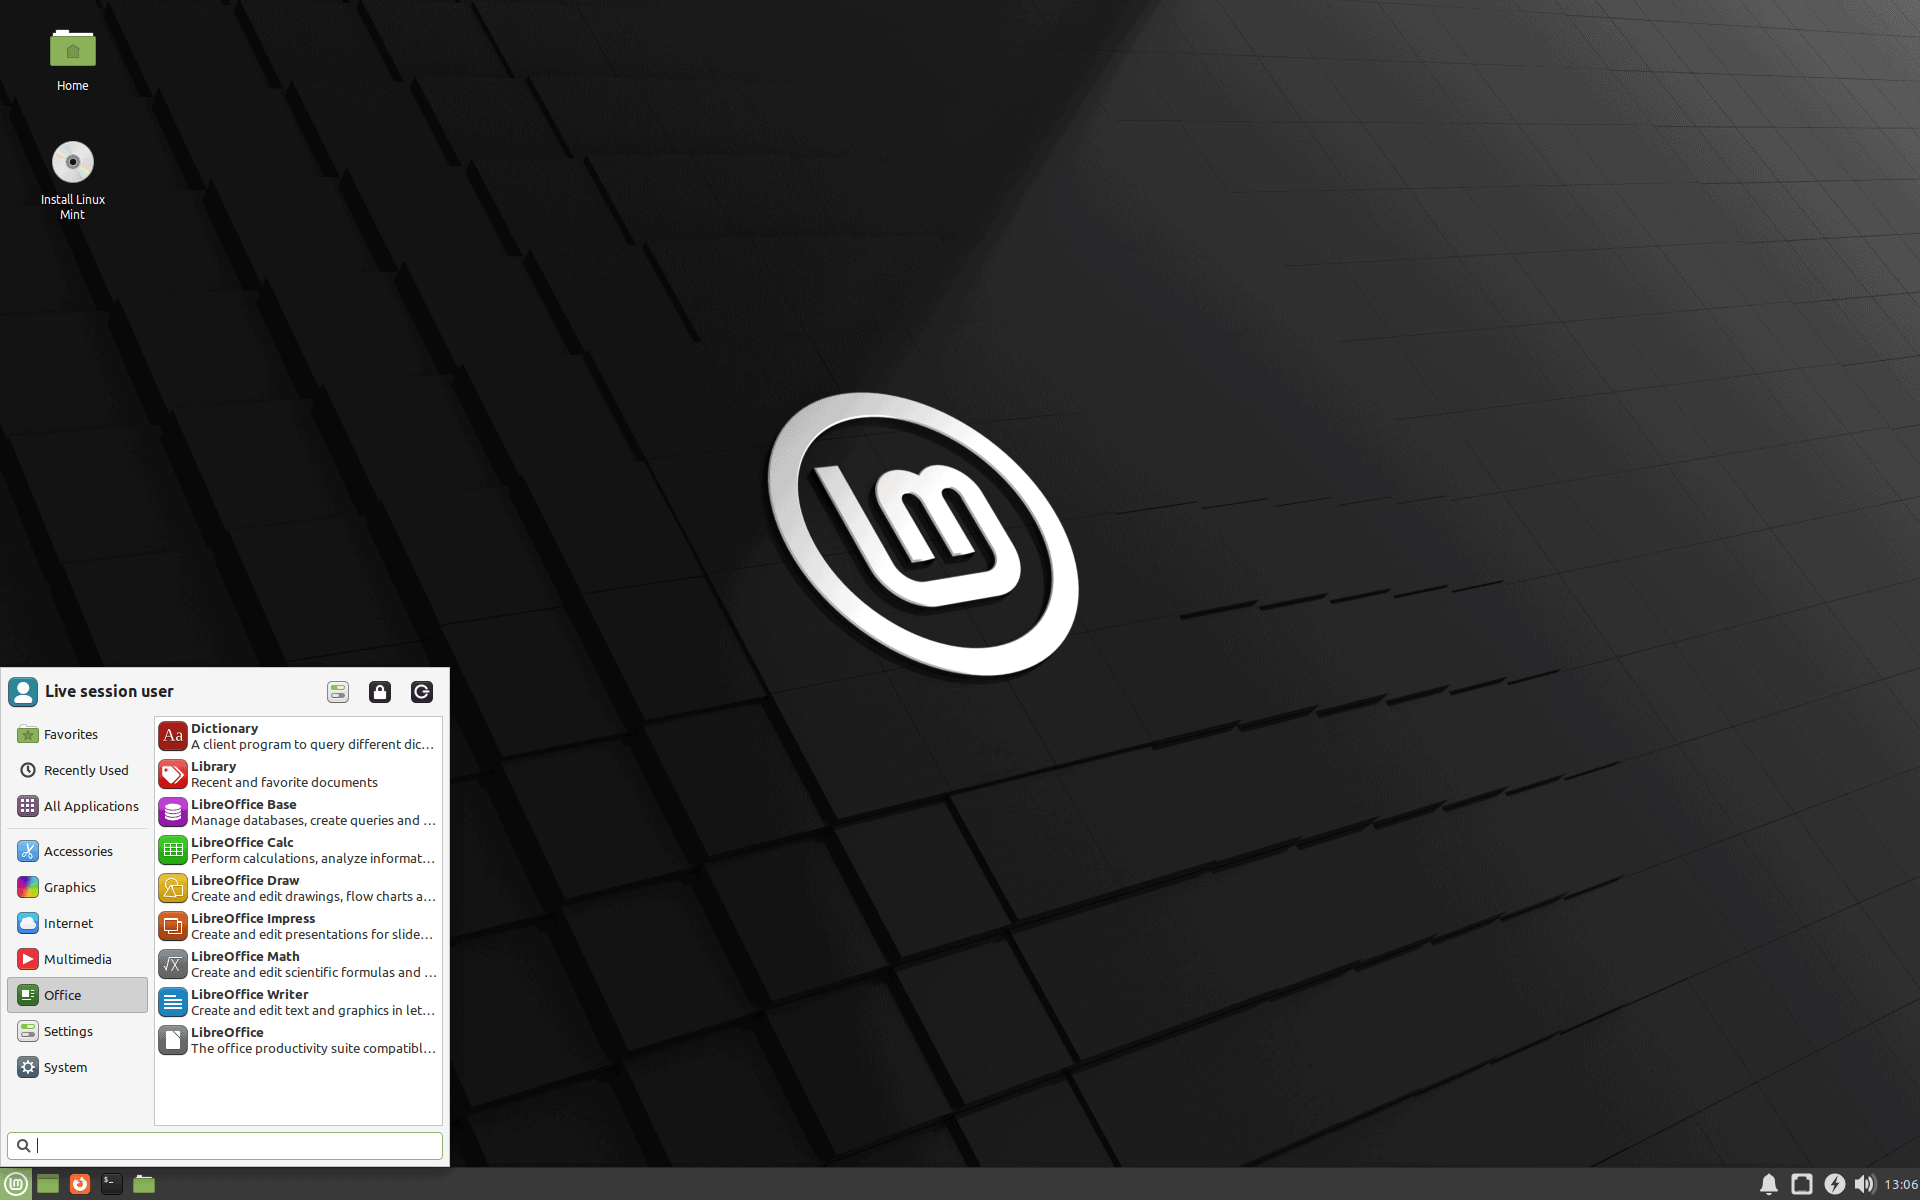 Linux Mint 20.3: here is what is new